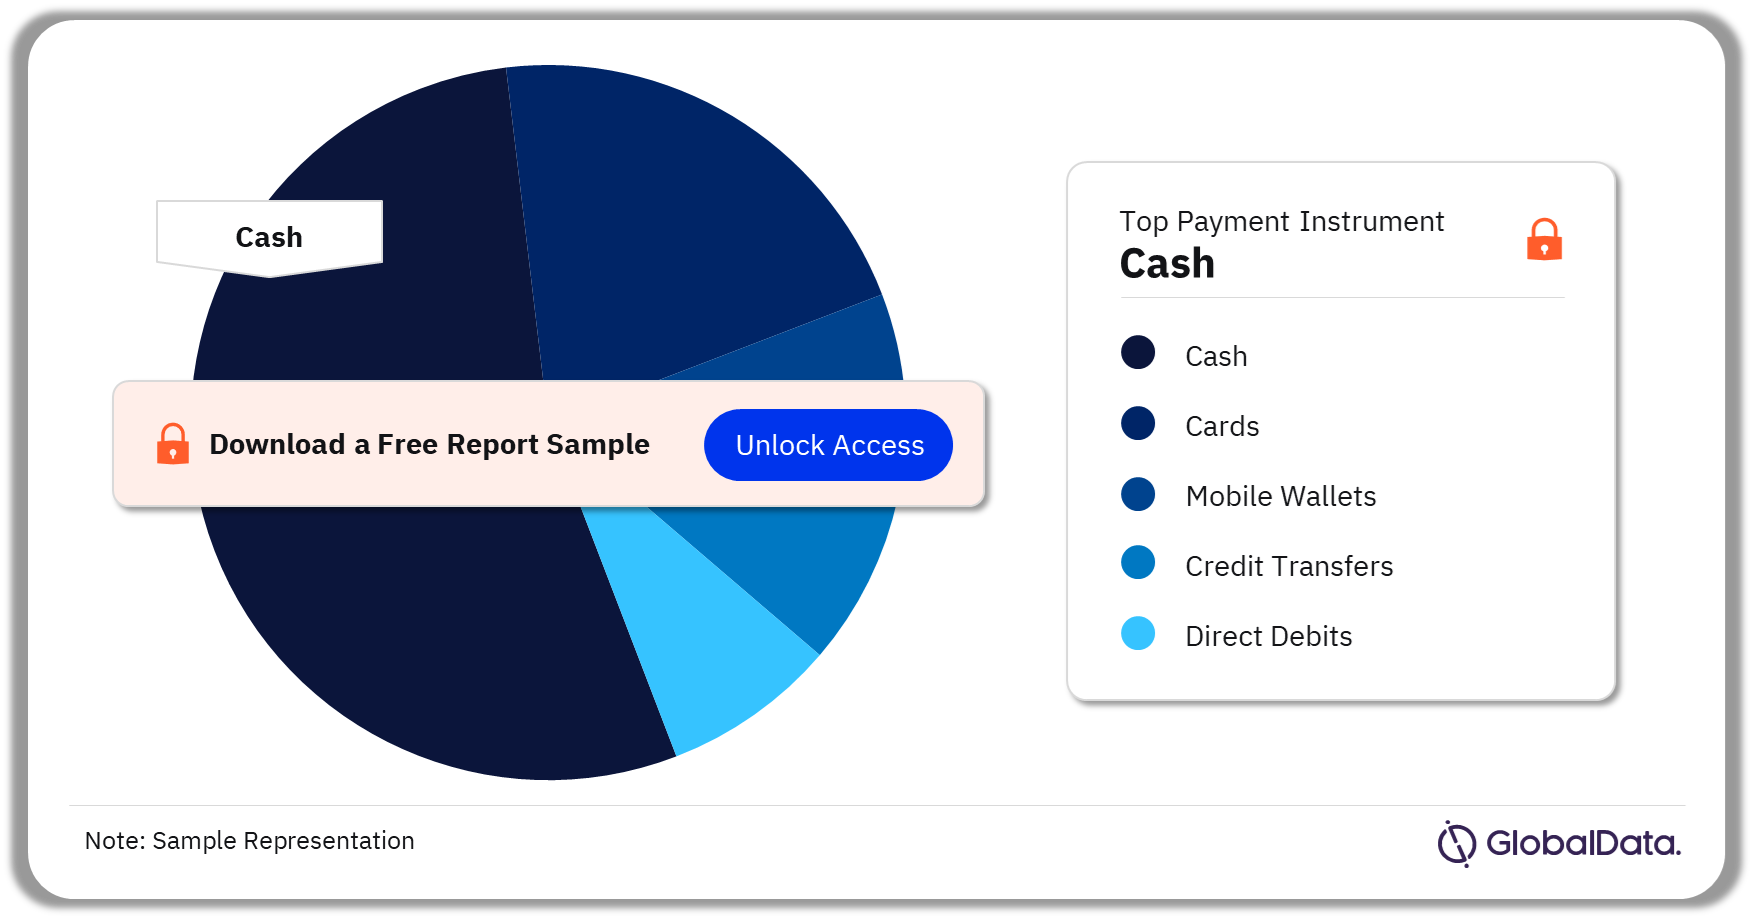 Hungary Cards and Payments Market Analysis by Payment Instruments, 2023 (%)